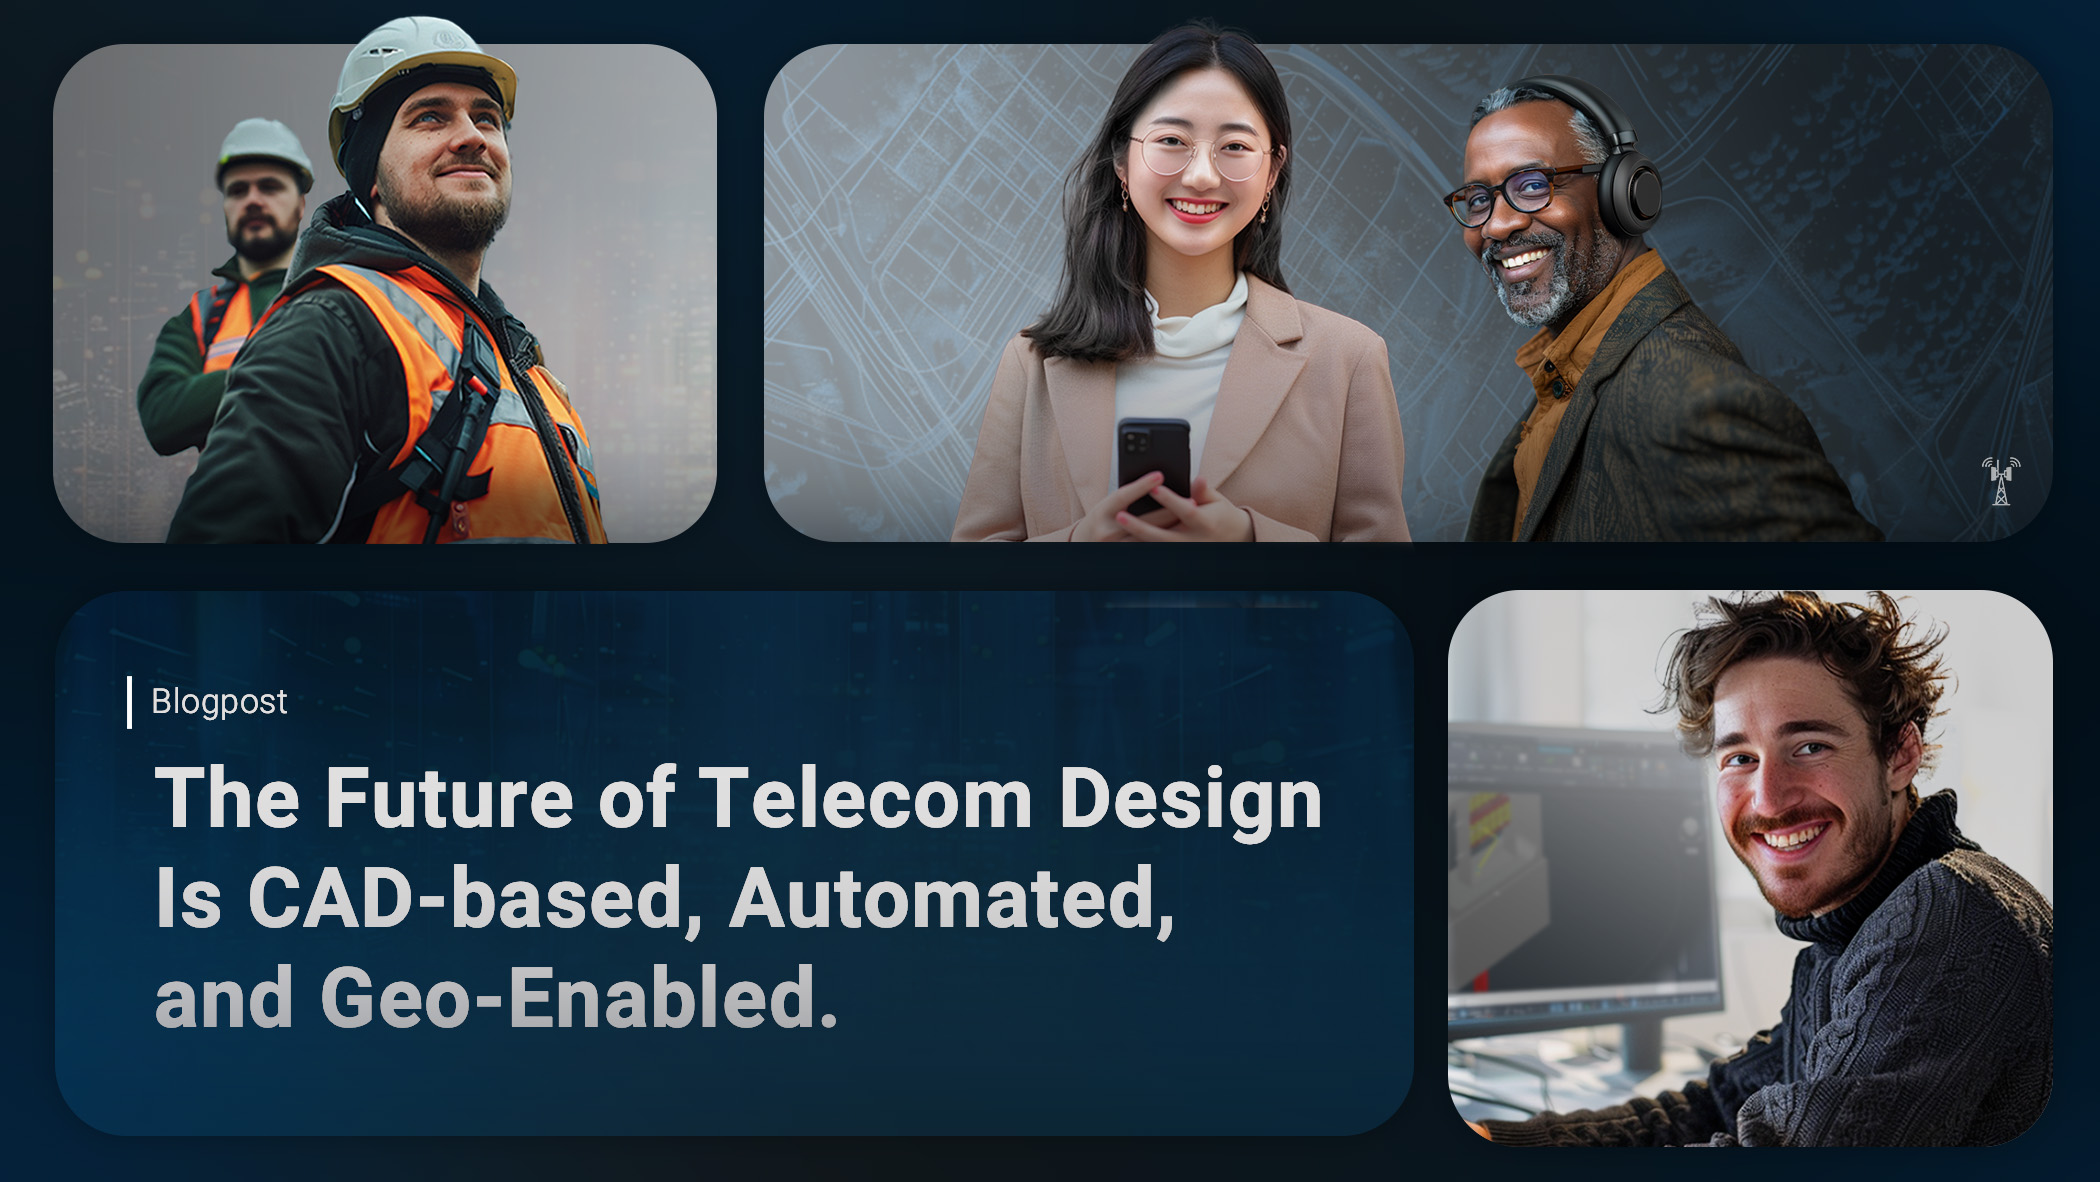 Image showing telecommunication field workers, telecom customers, and a telecom designer